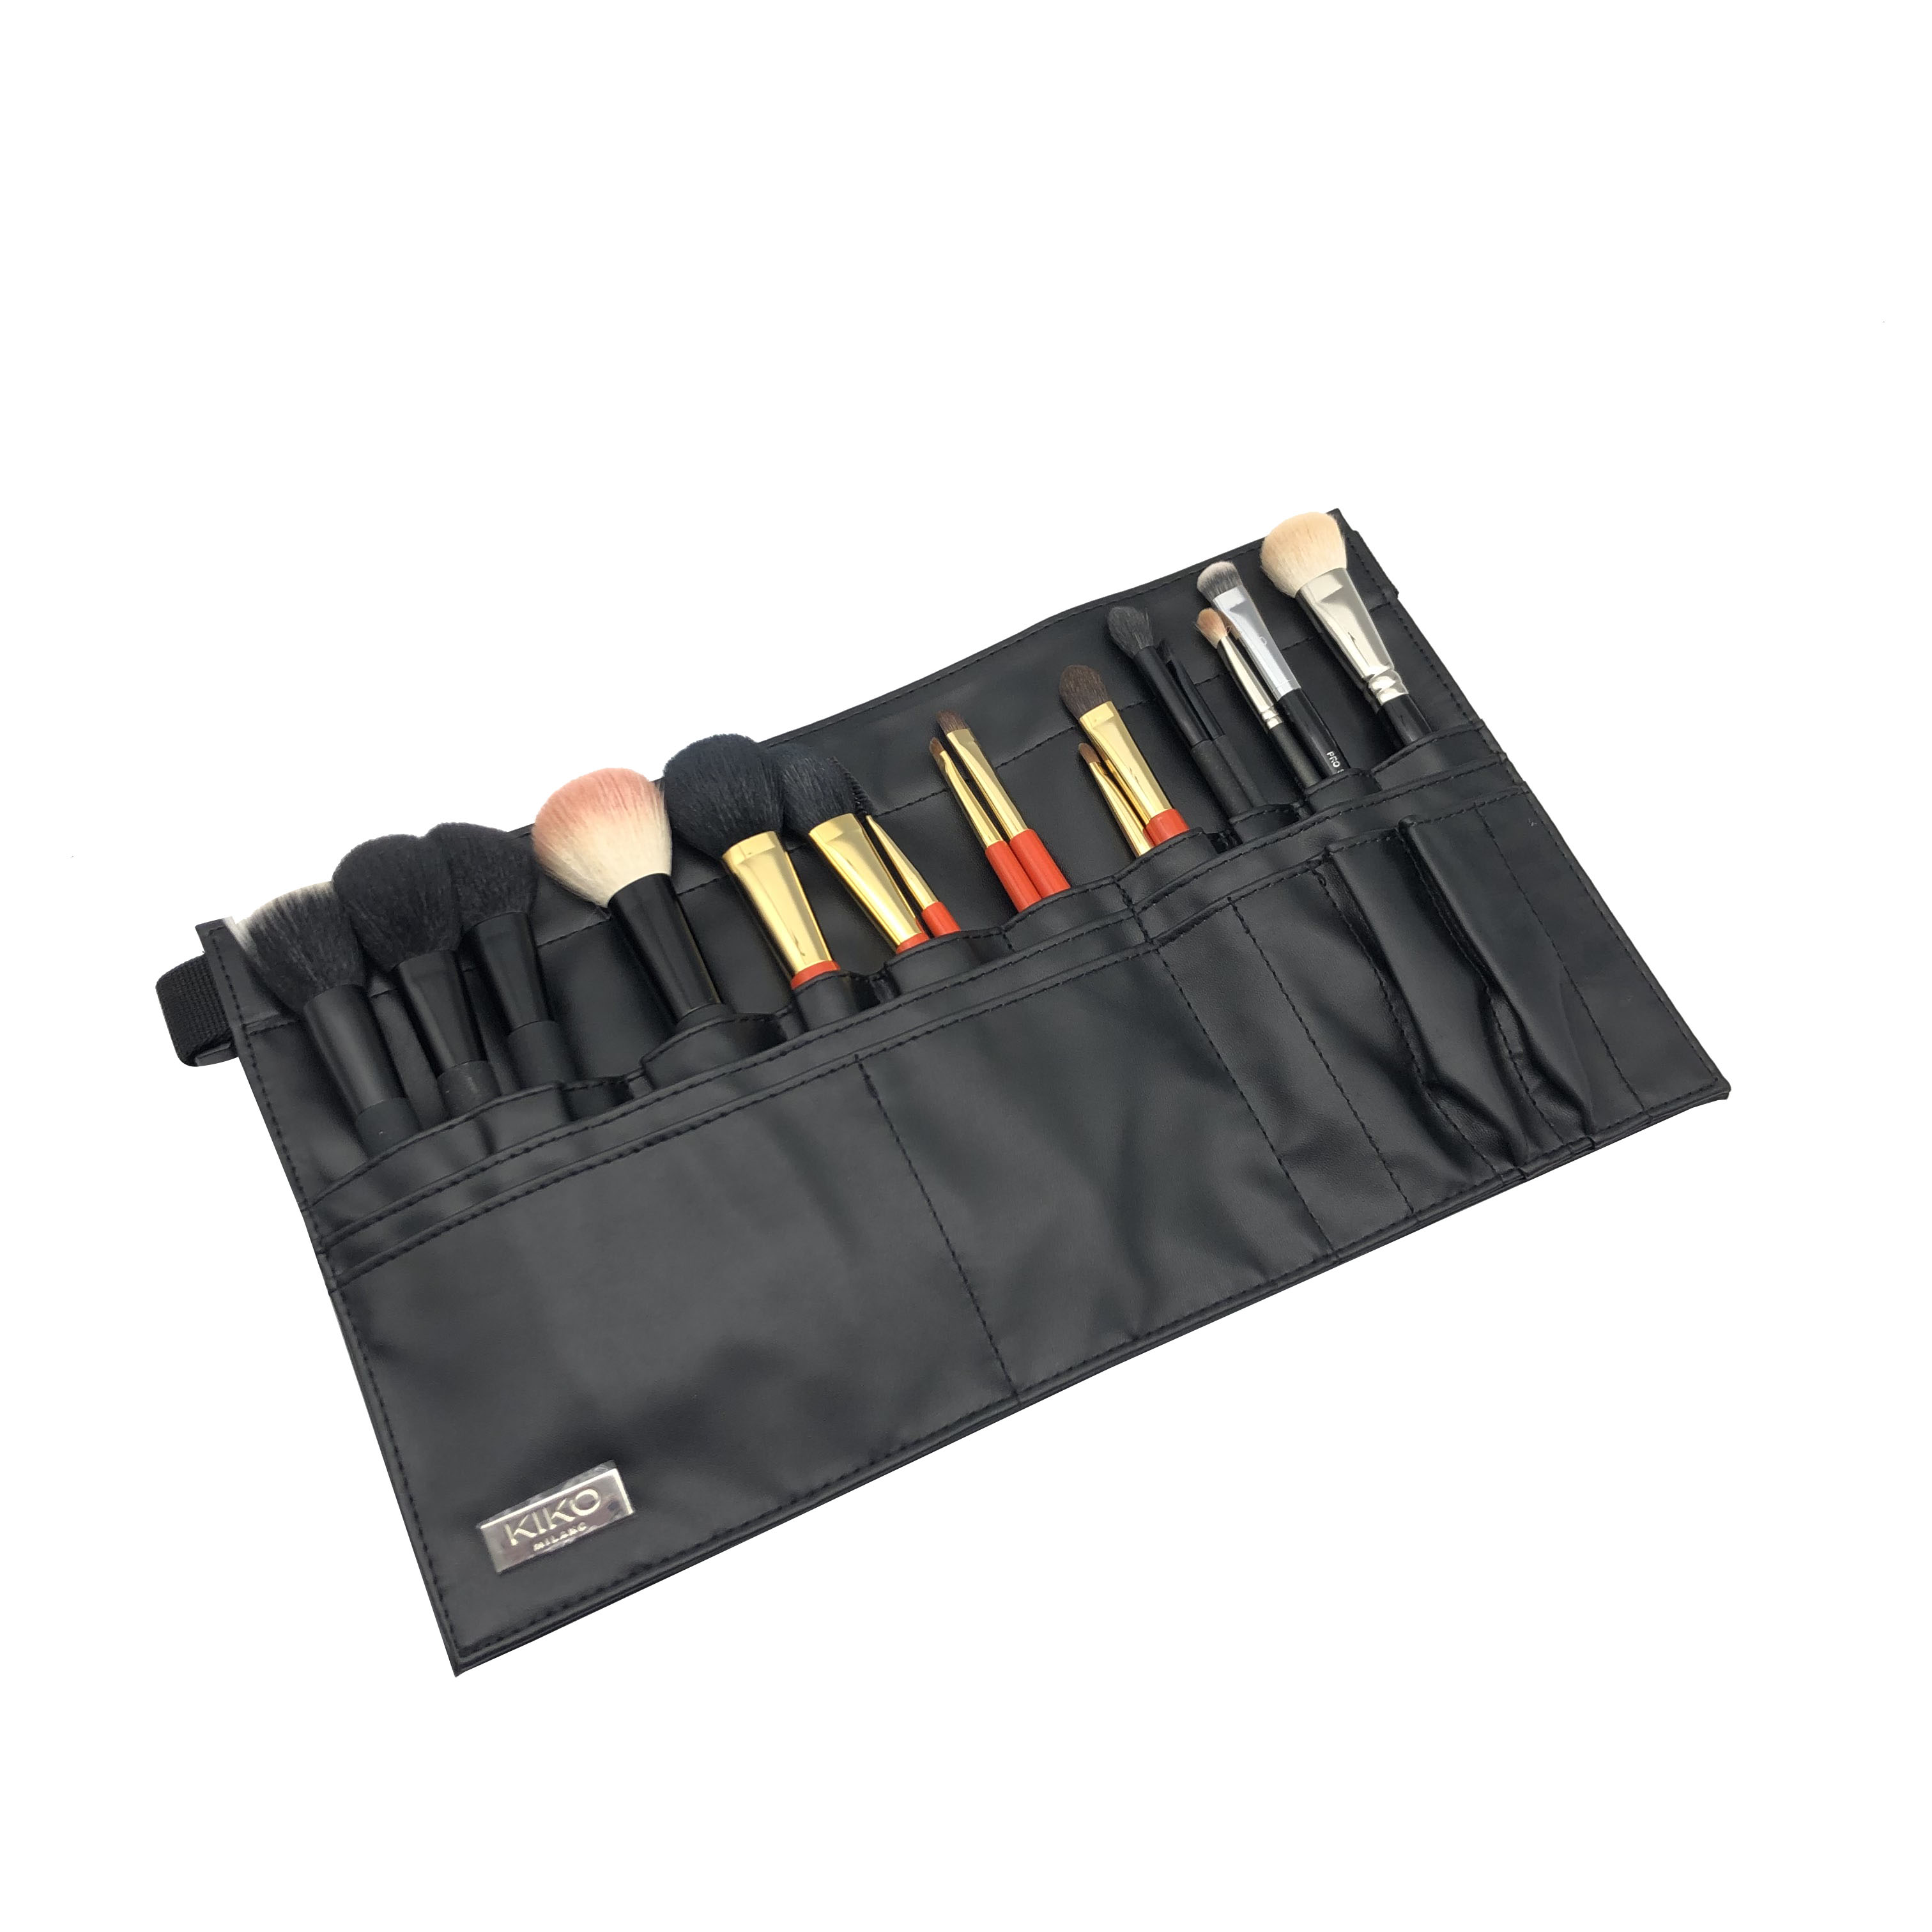 Innovative Beauty Storage: Exploring the Lees Cosmetic Bag C